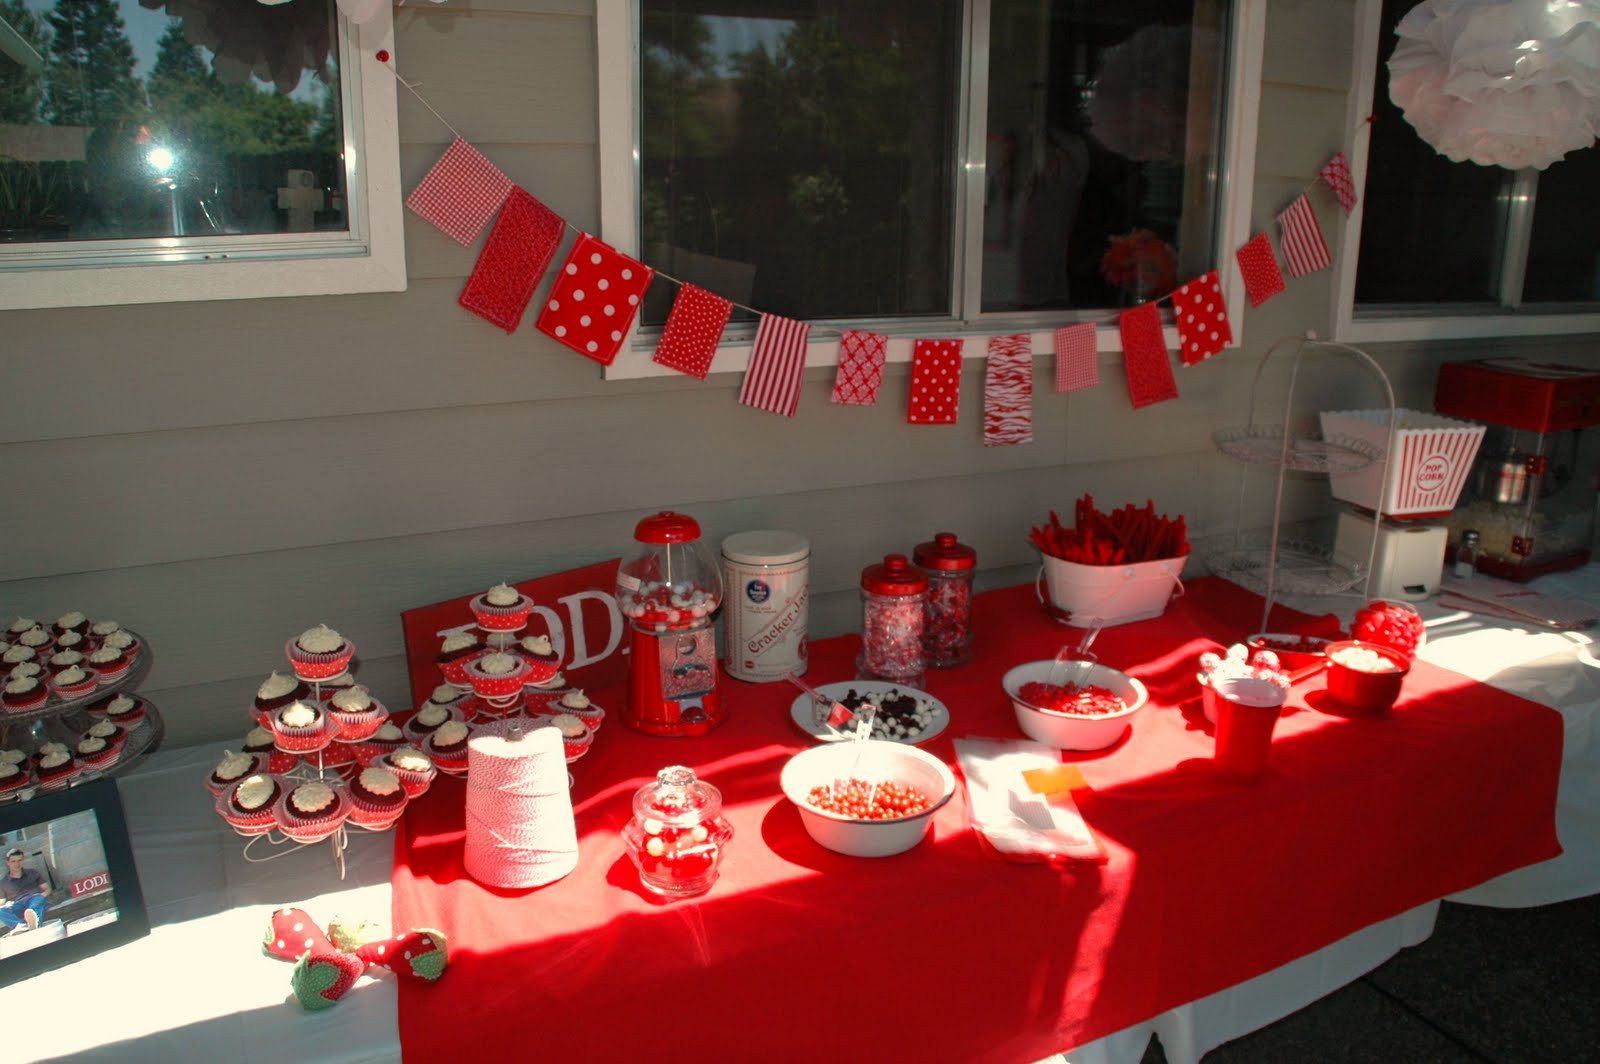 Red White And Black Graduation Party Ideas
 Lipstick and Laundry Red and White Graduation Party